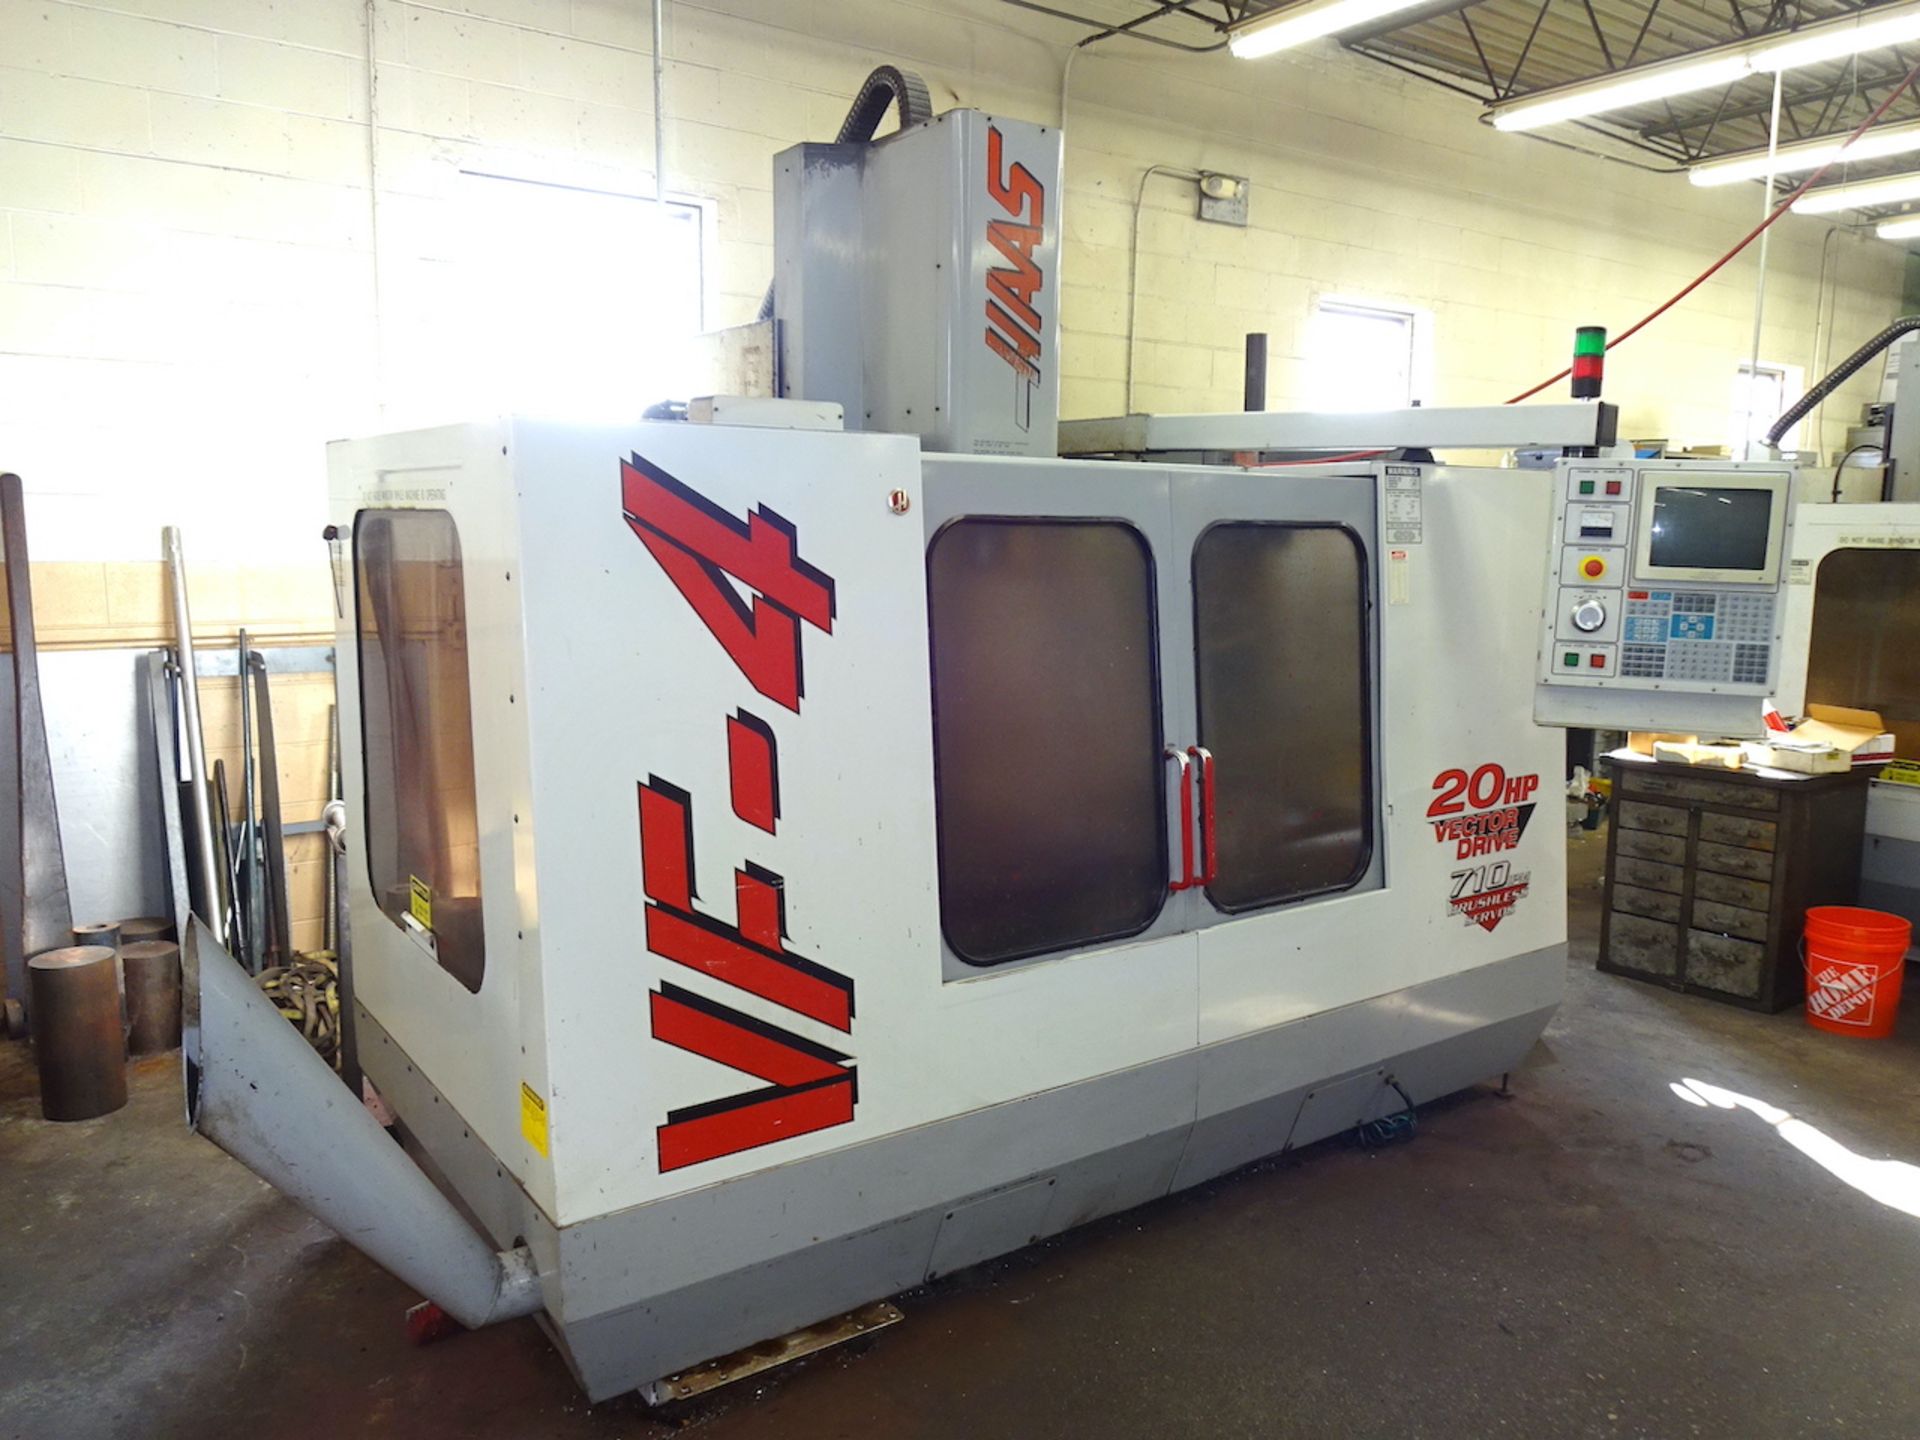 1998 Haas Model VF-4 CNC Vertical Machining Center, S/N 14860, 20 HP Vector Drive, 710 IPM Brushless